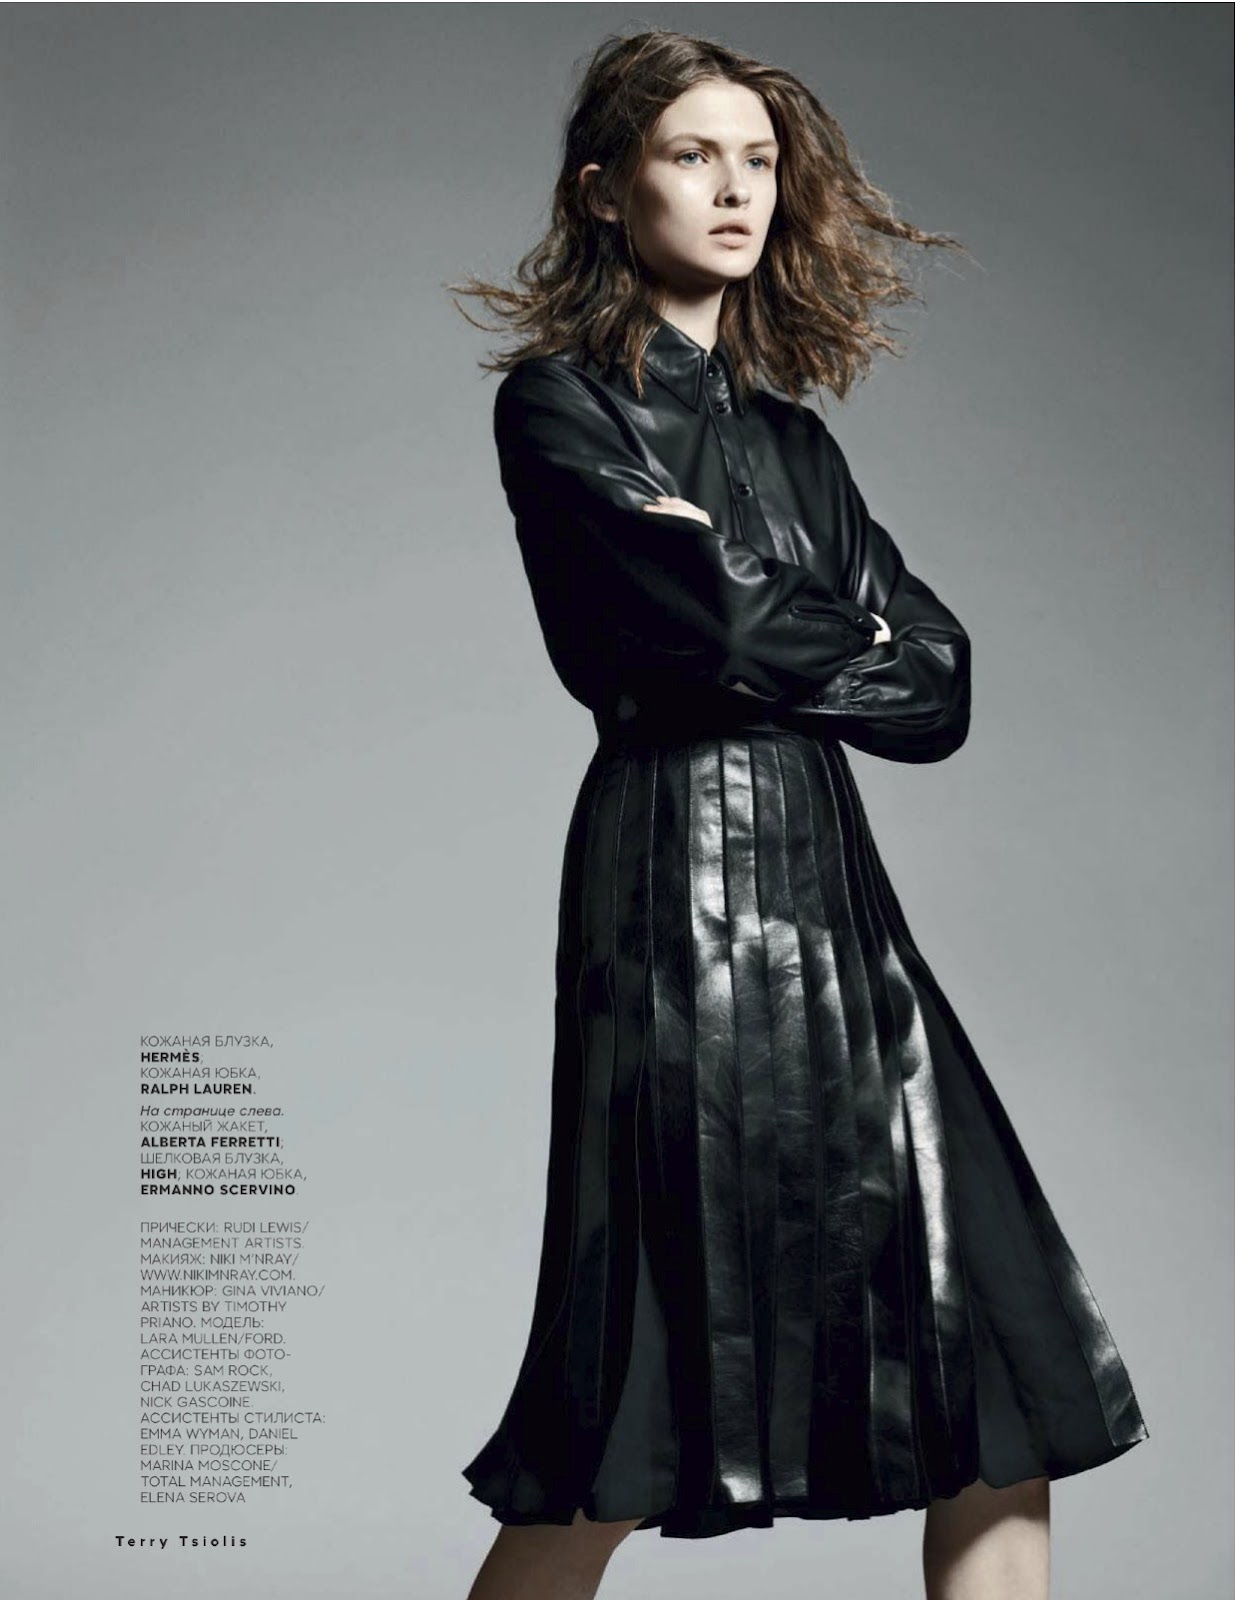 lara mullen by terry tsiolis for vogue russia september 2012 | visual ...